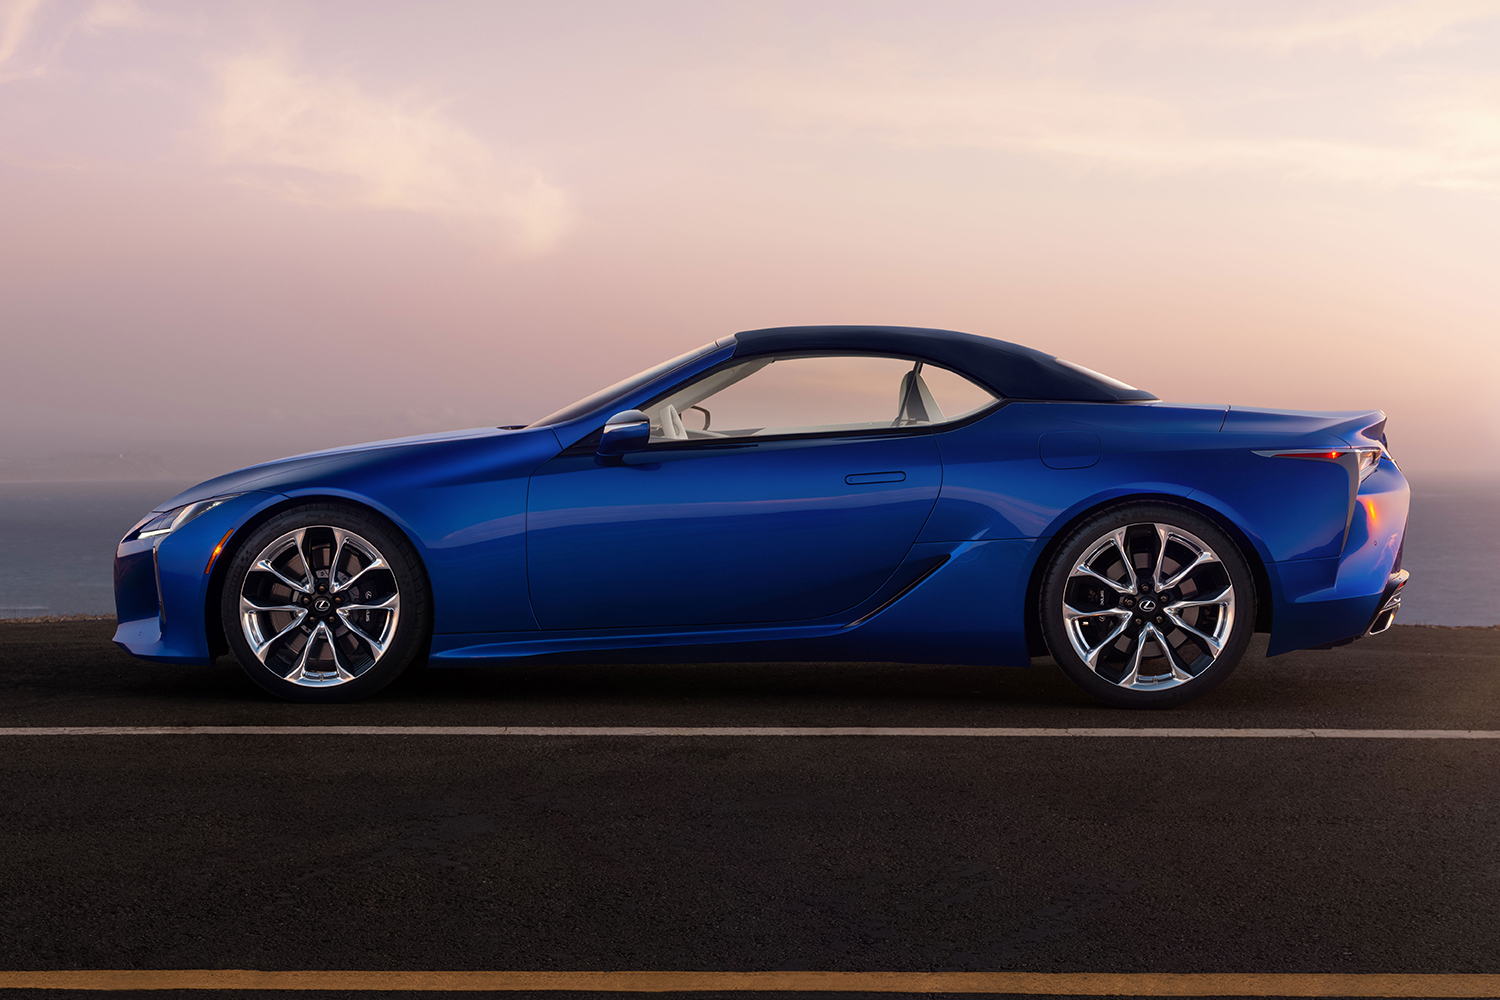 The profile of the 2021 Lexus LC 500 Convertible with the top up. We reviewed the grand tourer and came away loving it.